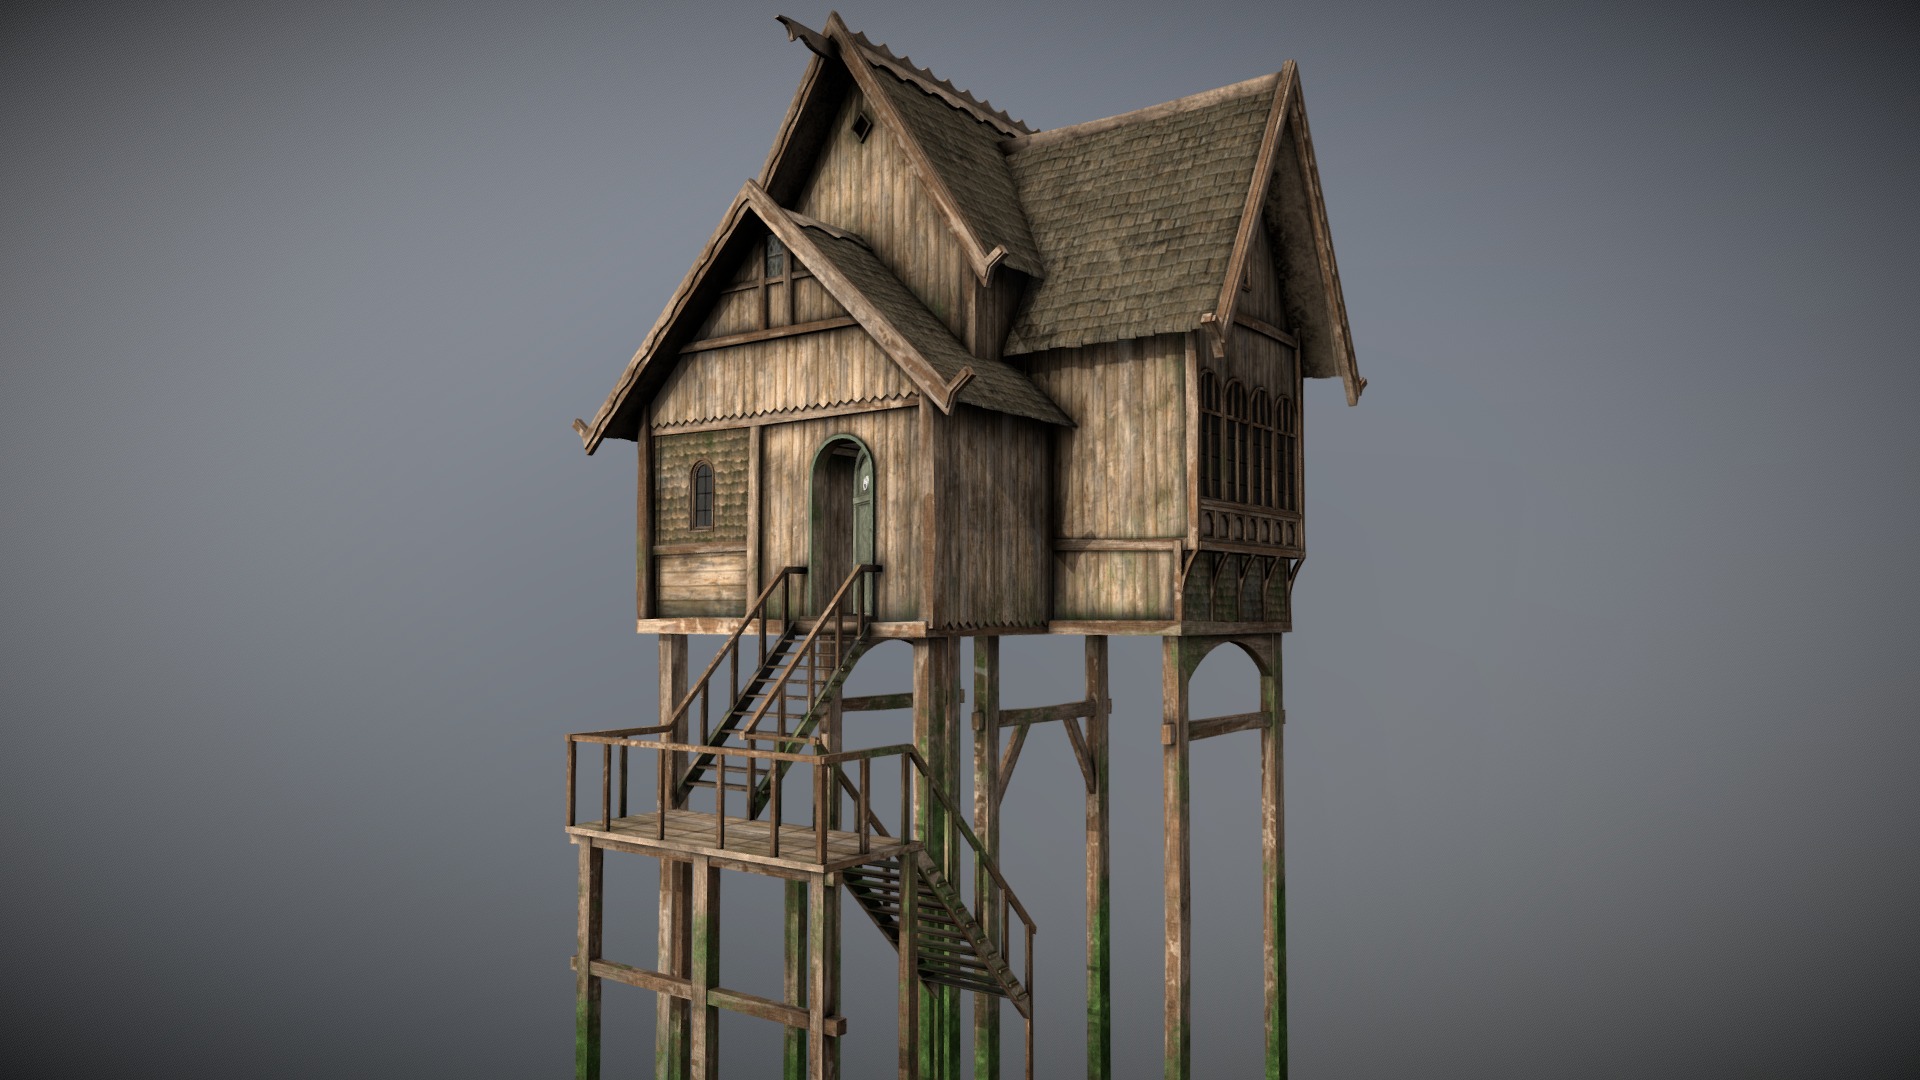 3D model Medieval Lake Village – House 7 with interiors - This is a 3D model of the Medieval Lake Village - House 7 with interiors. The 3D model is about a wooden house on a ladder.